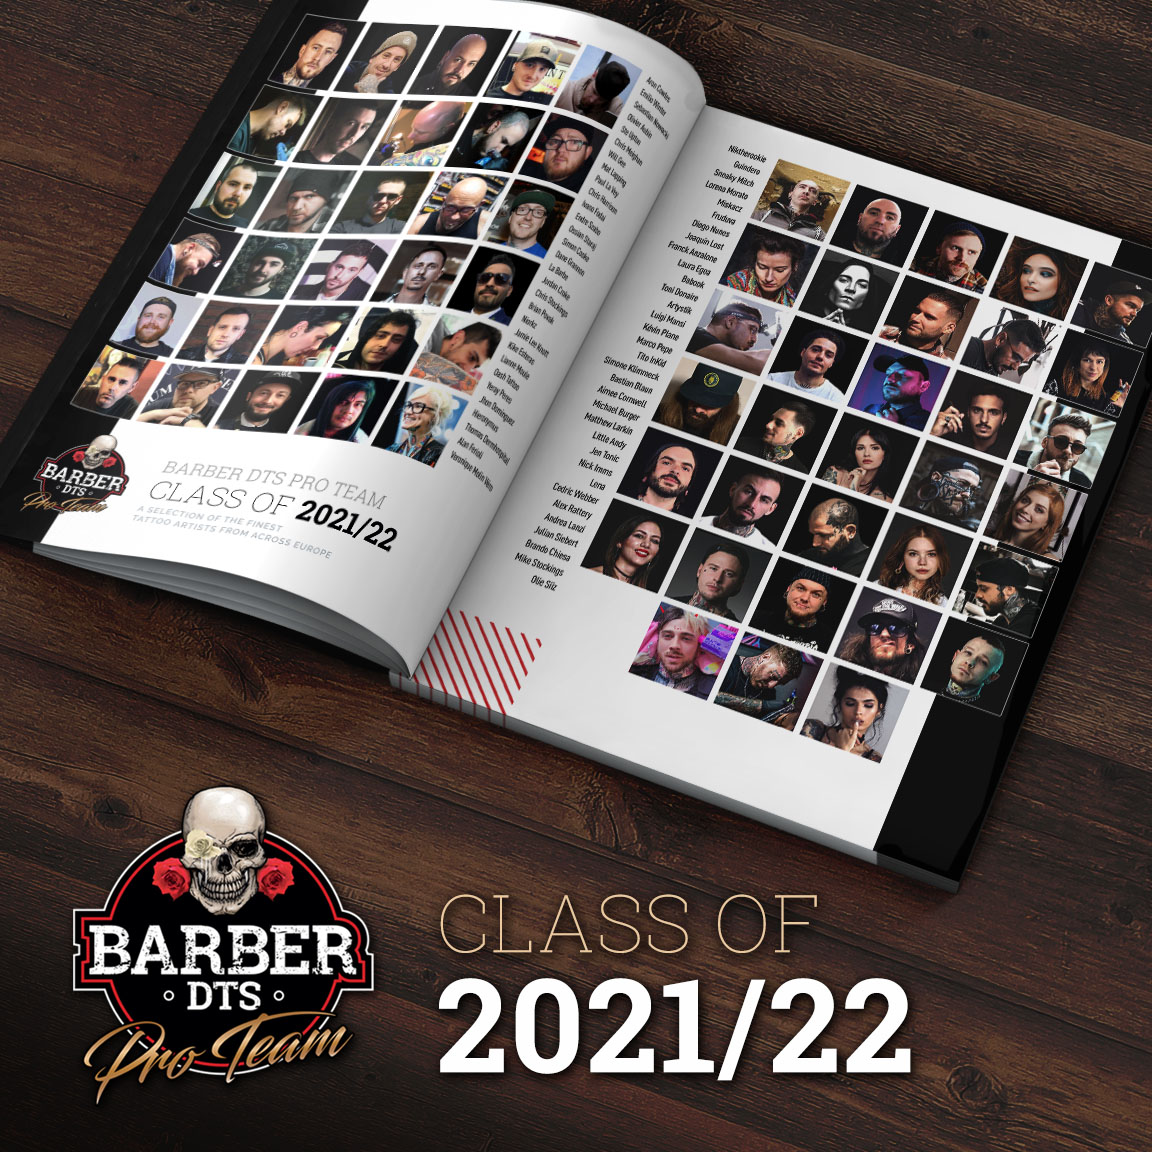 Introducing…the new Barber DTS Pro Team